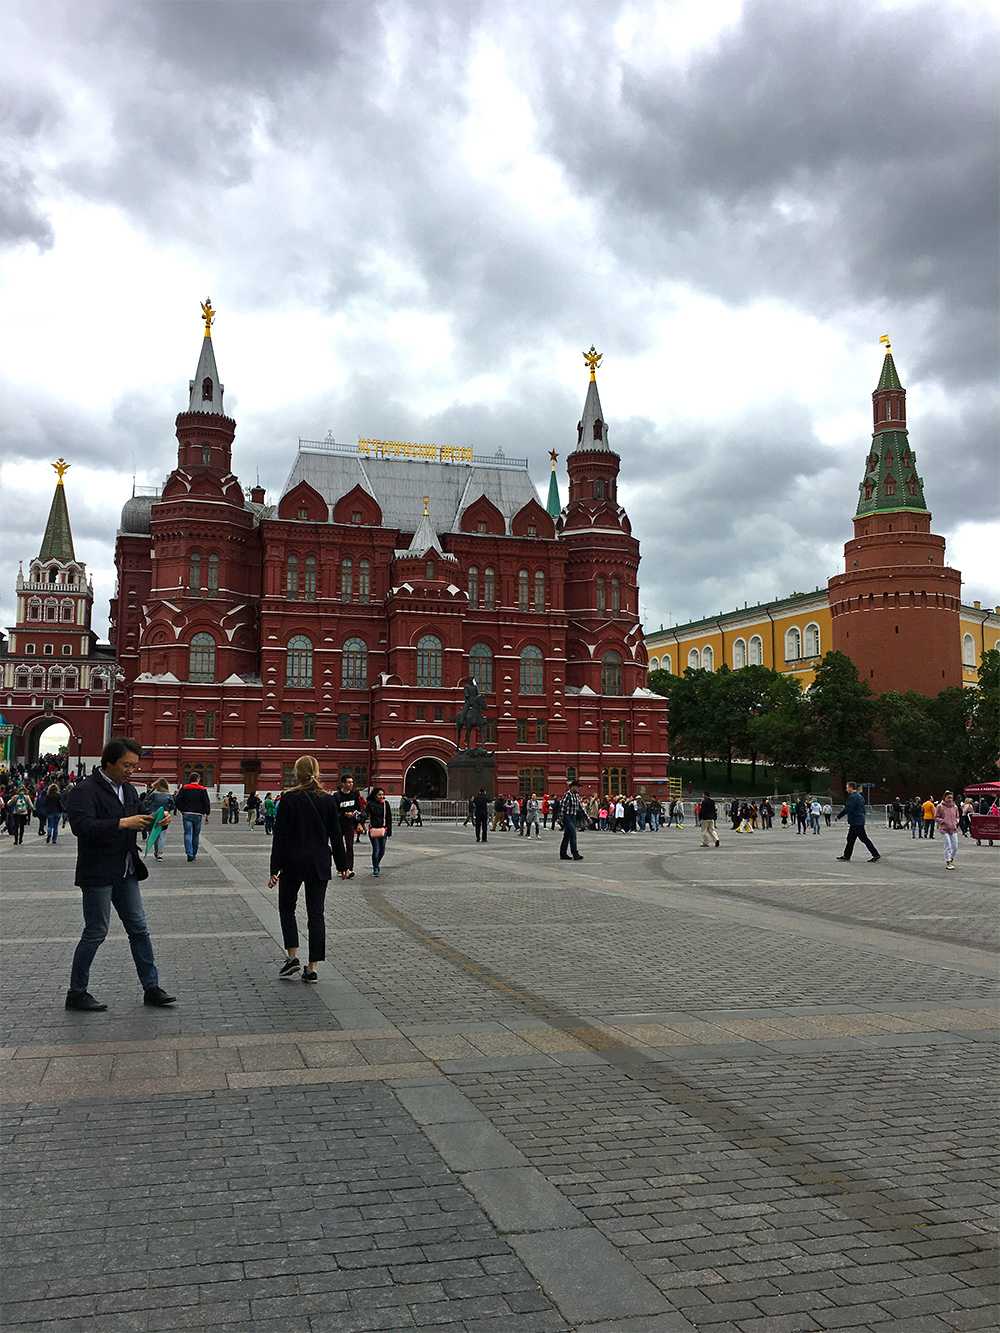 From Russia With Love: When politics meets travel